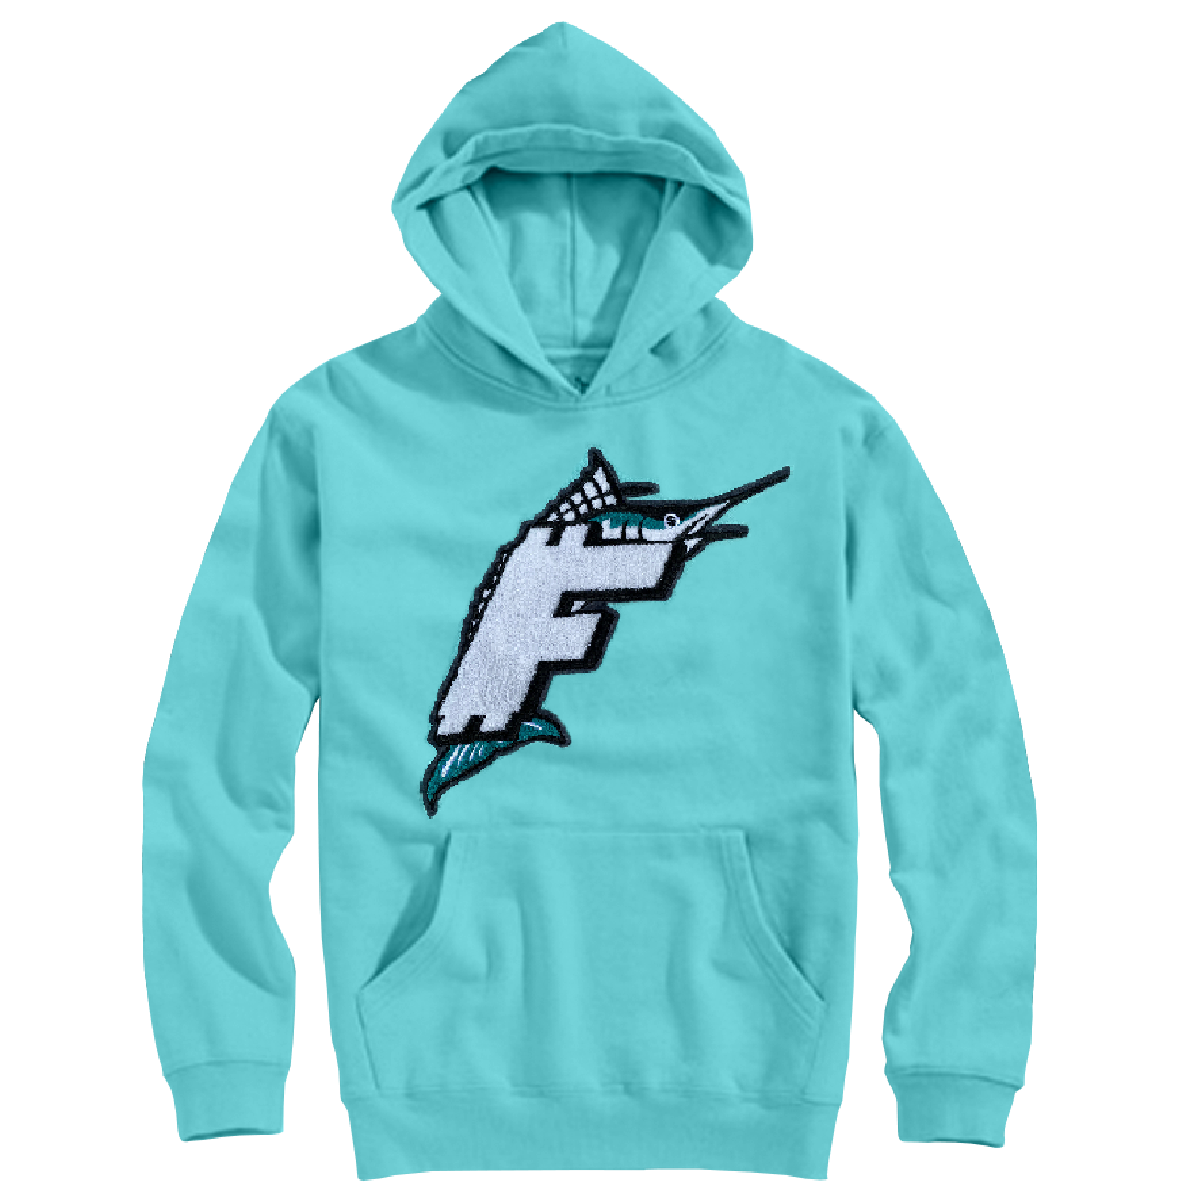 FUNDRAISER PATCH HOODY TEAL